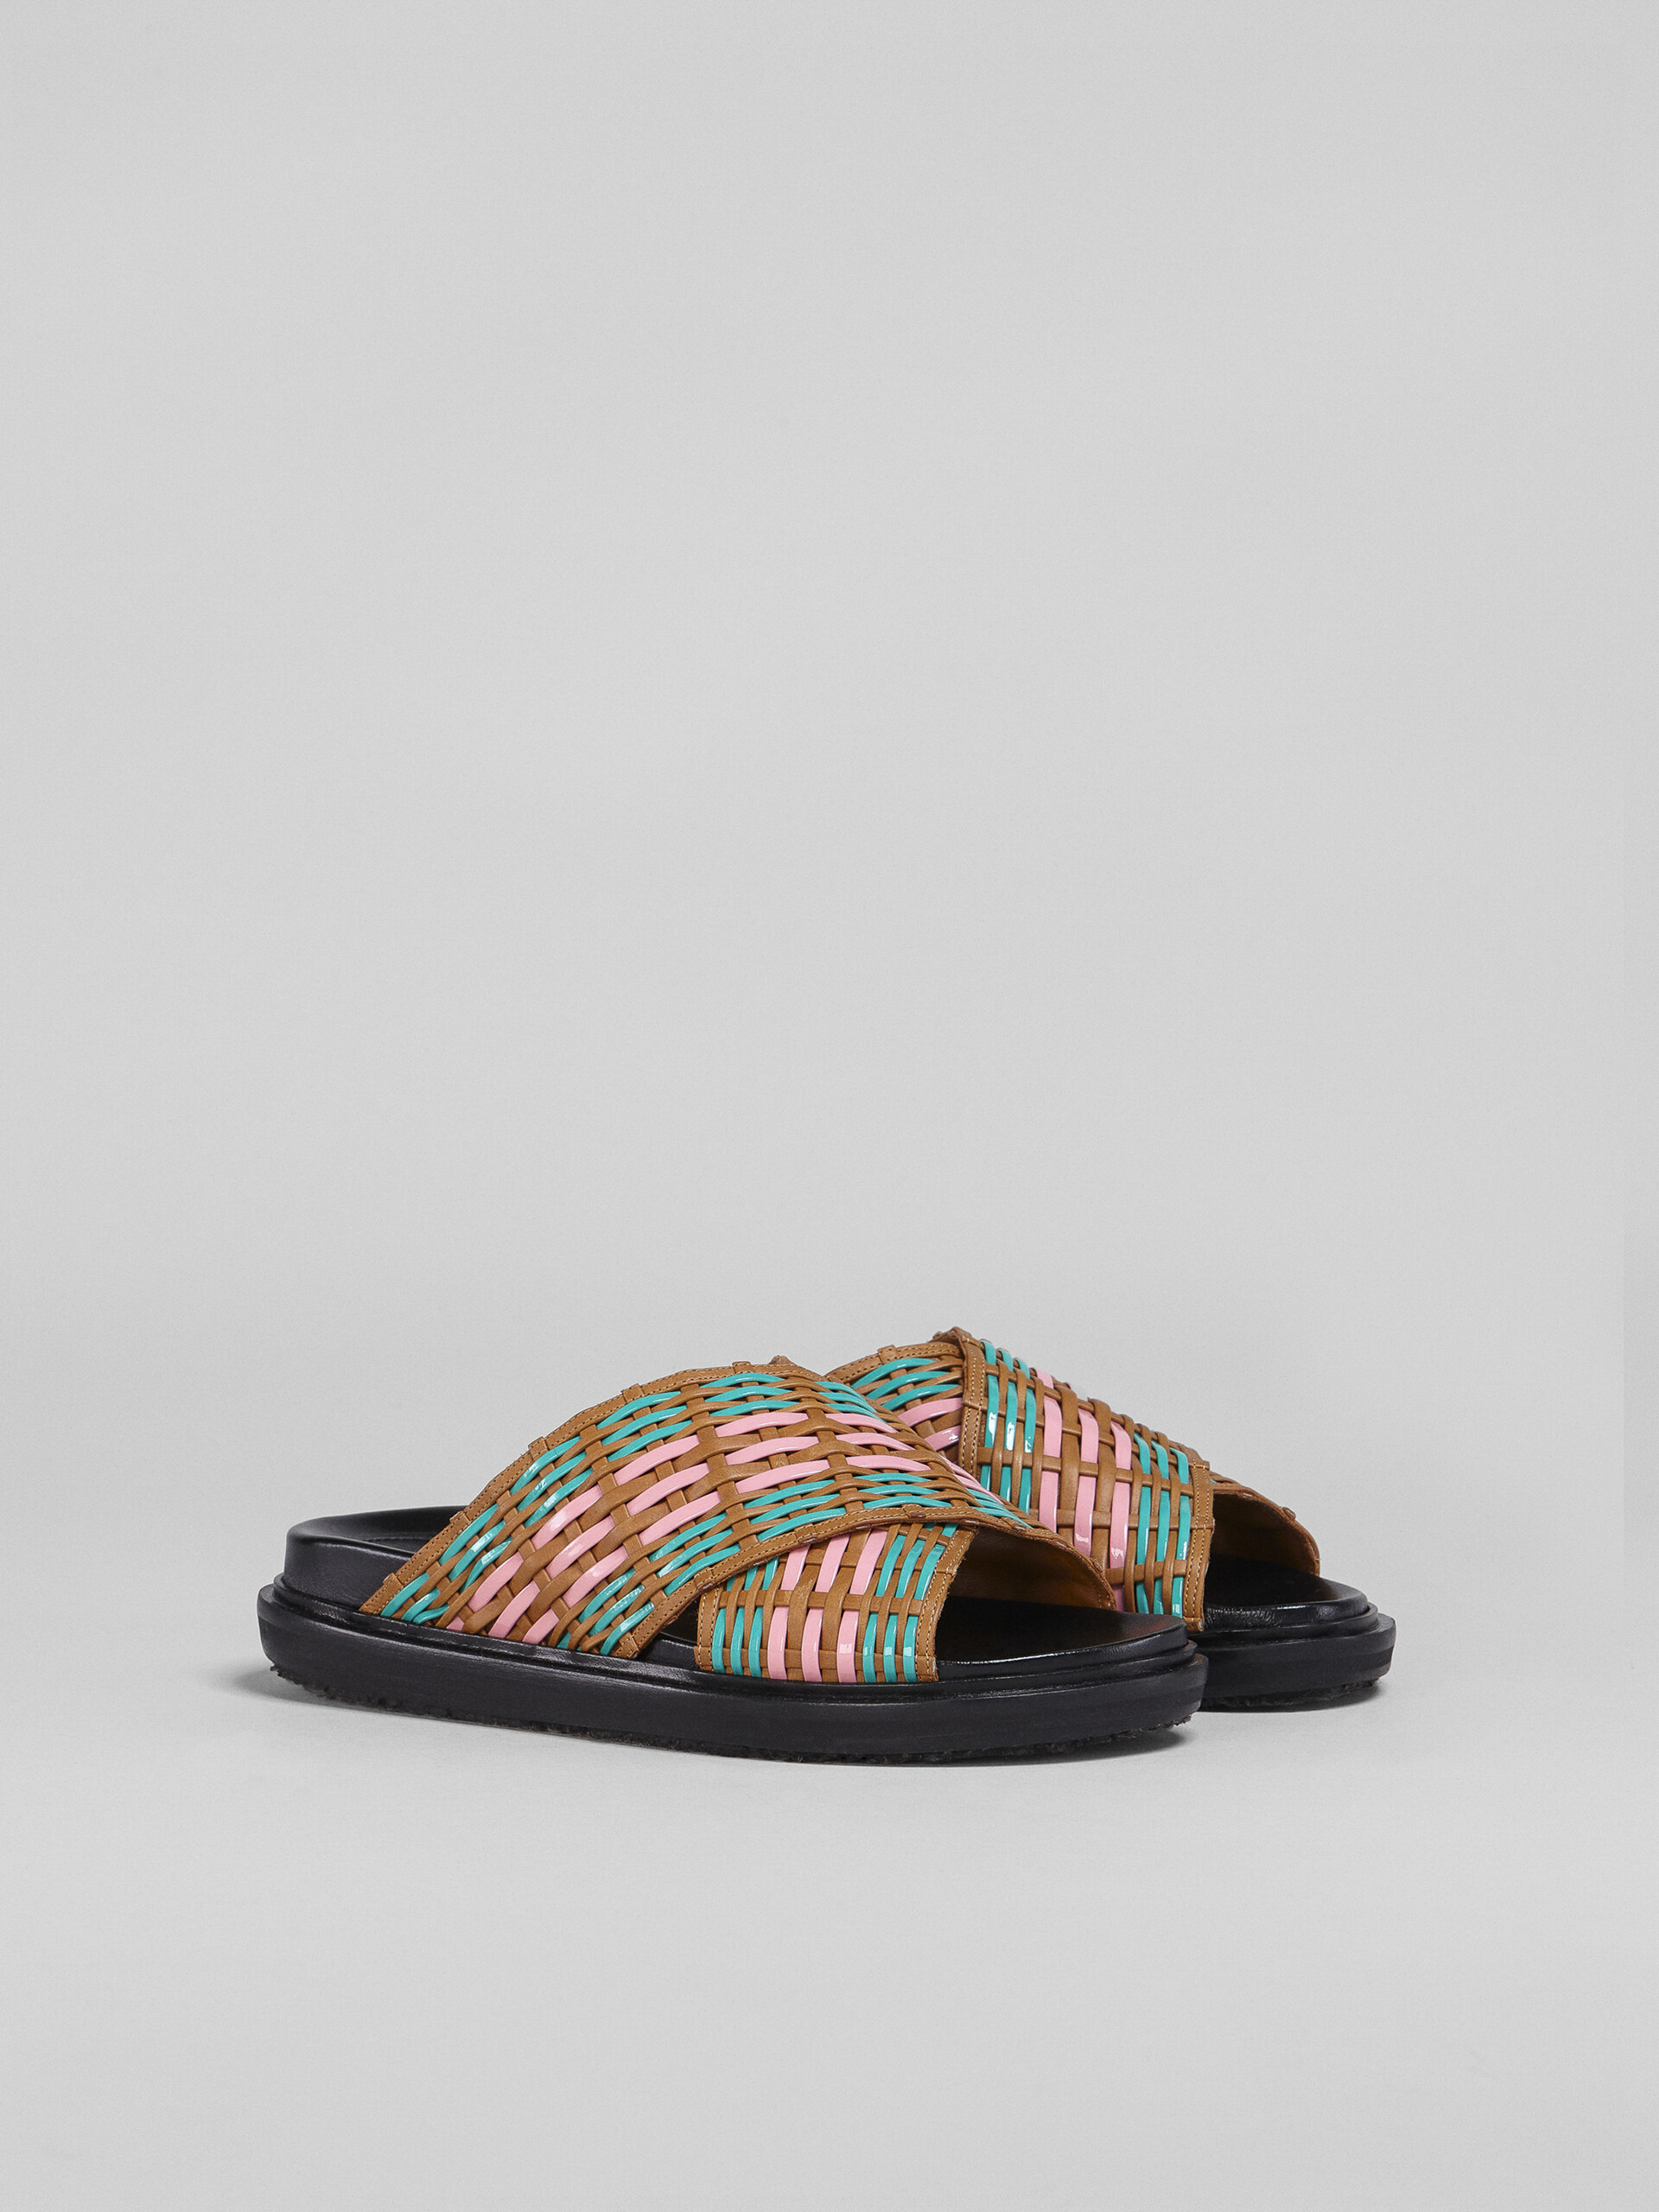 Woven leather Fussbett - Sandals - Image 2